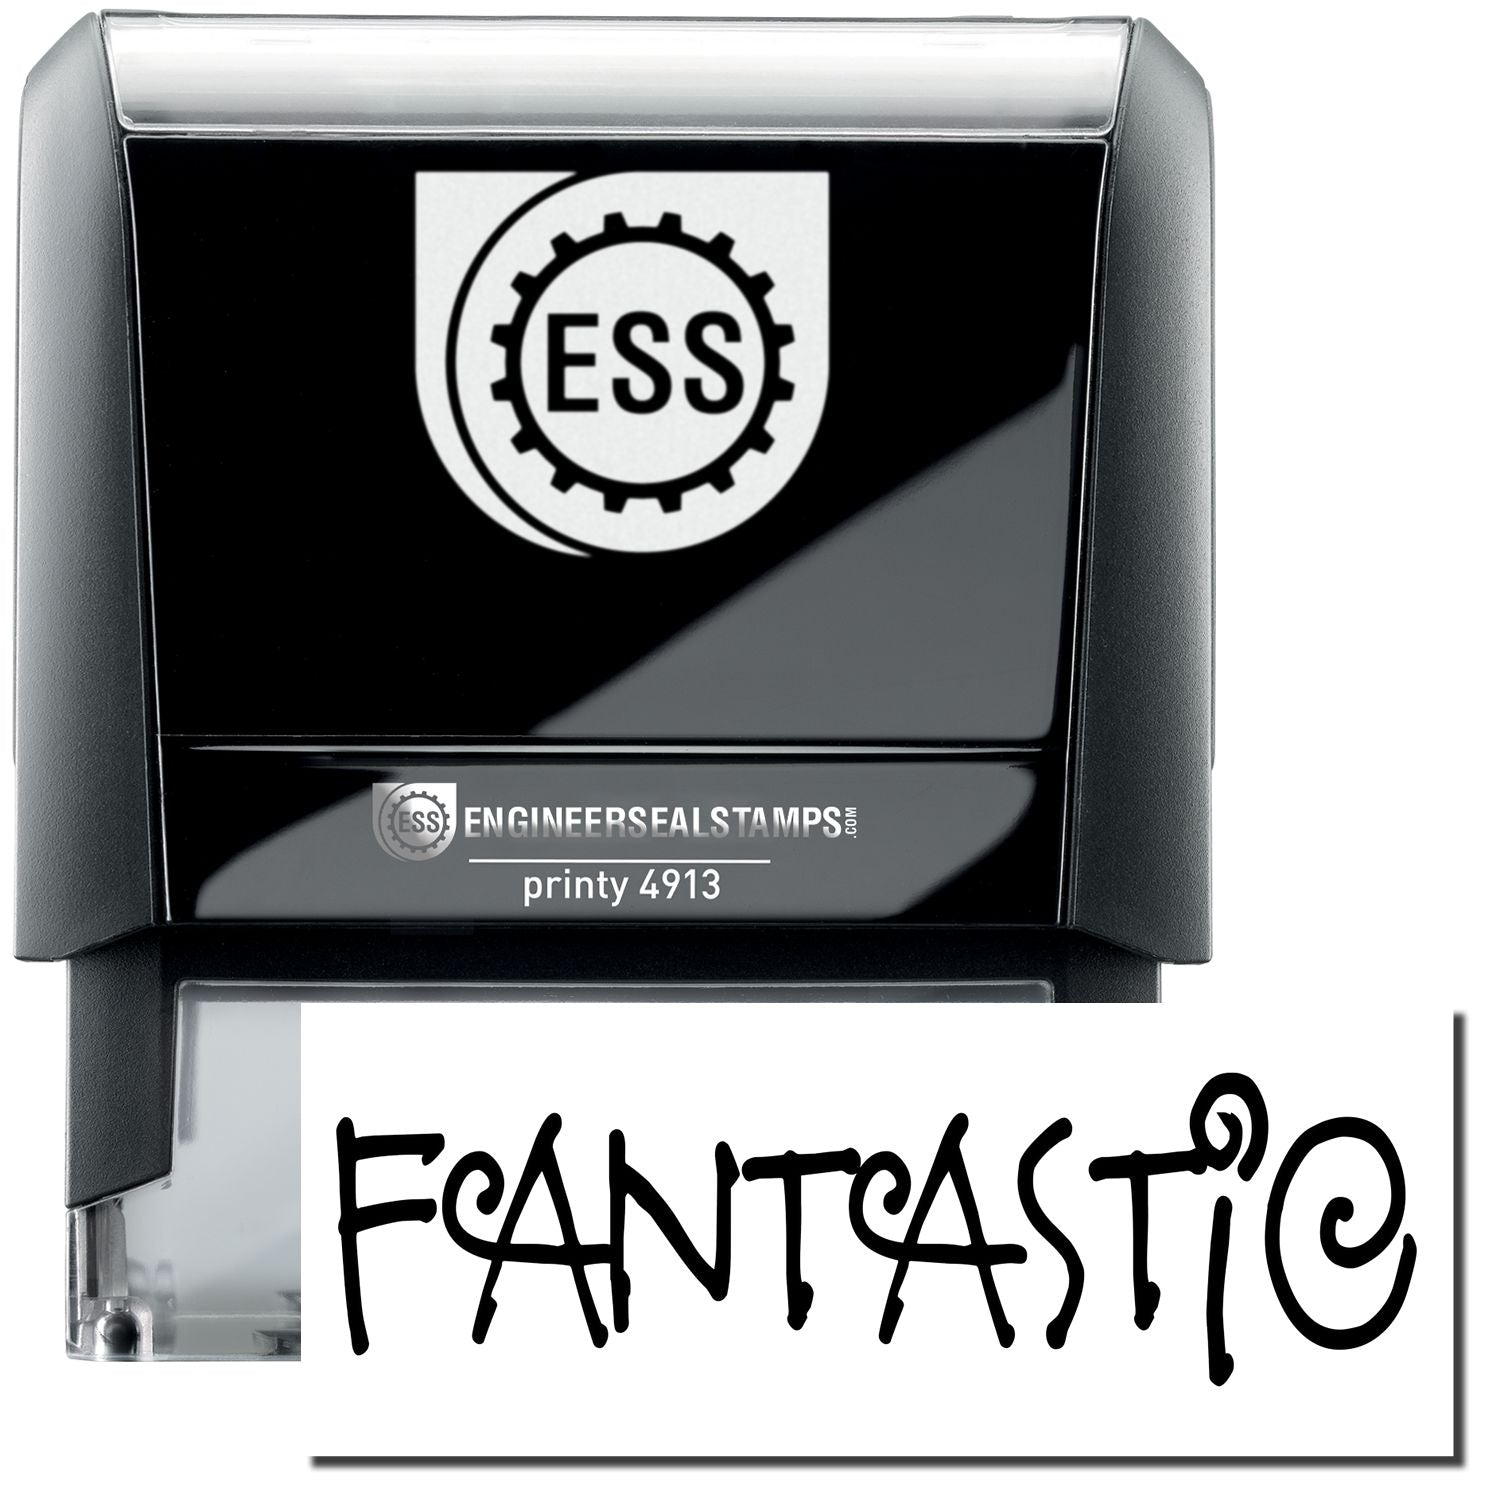 A self-inking stamp with a stamped image showing how the text "FANTASTIC" in a large unique font is displayed by it.